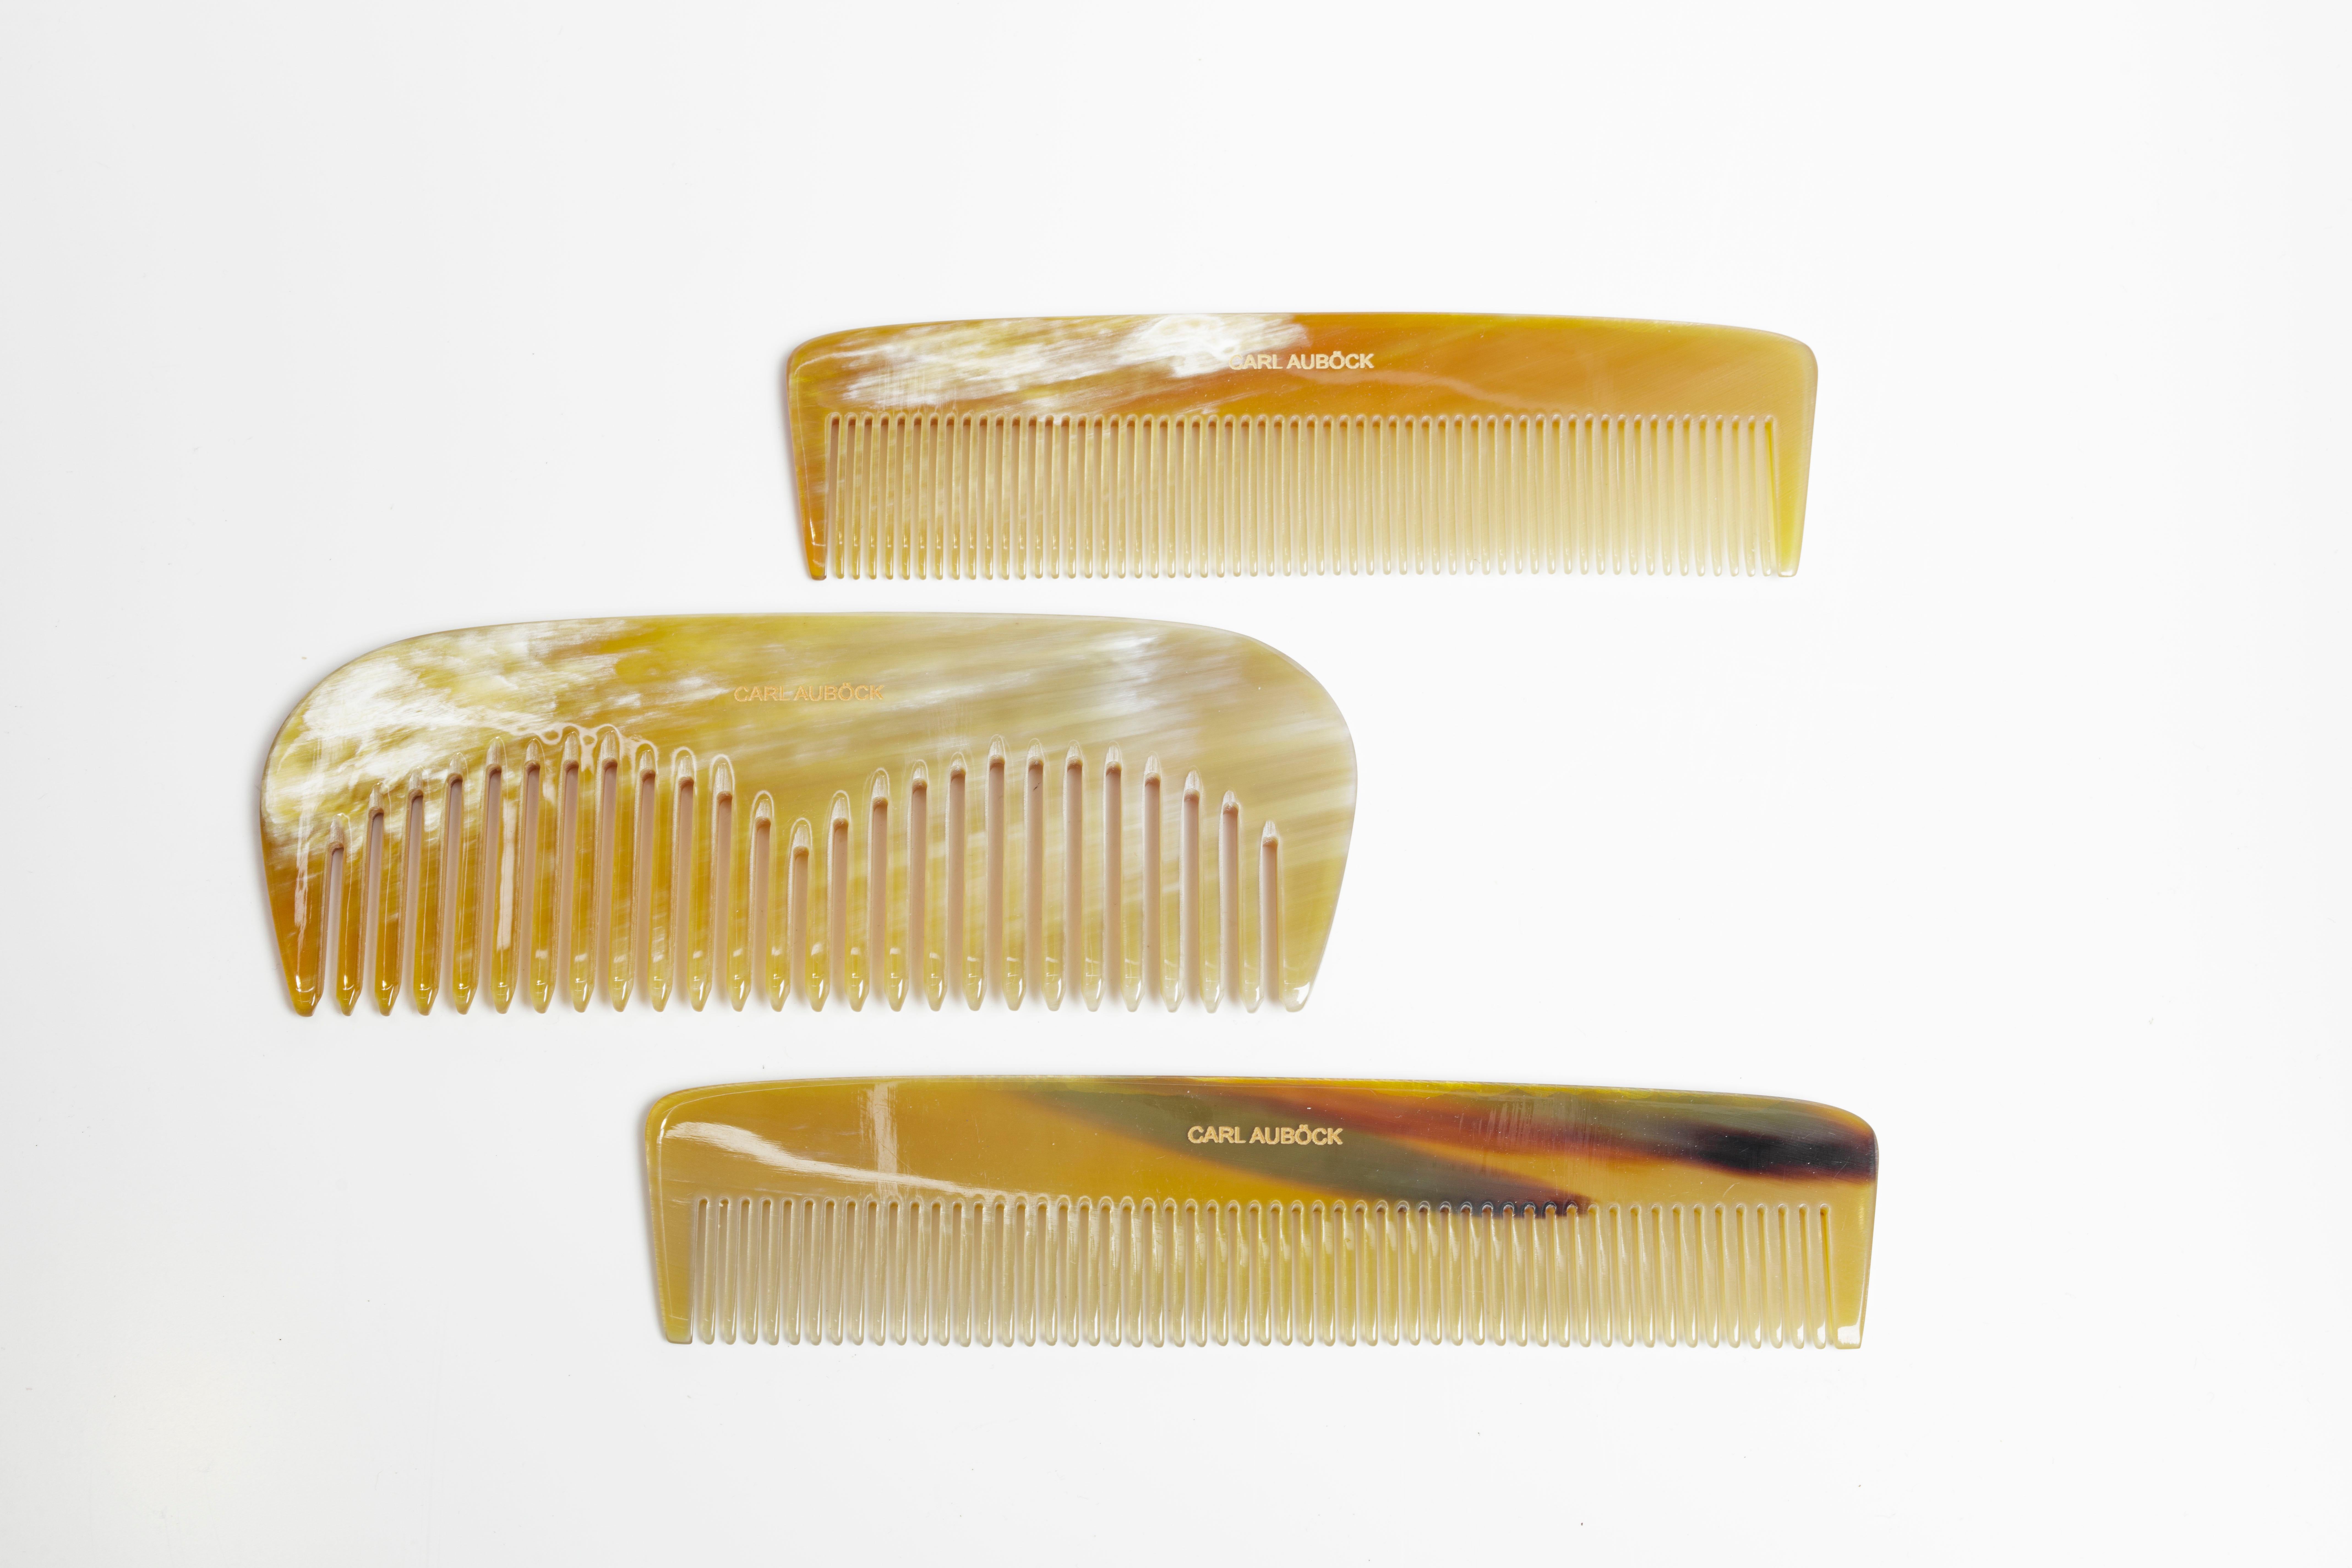 Contemporary Set of Three Combs and a Jar by Carl Auböck, Austria 2022 For Sale